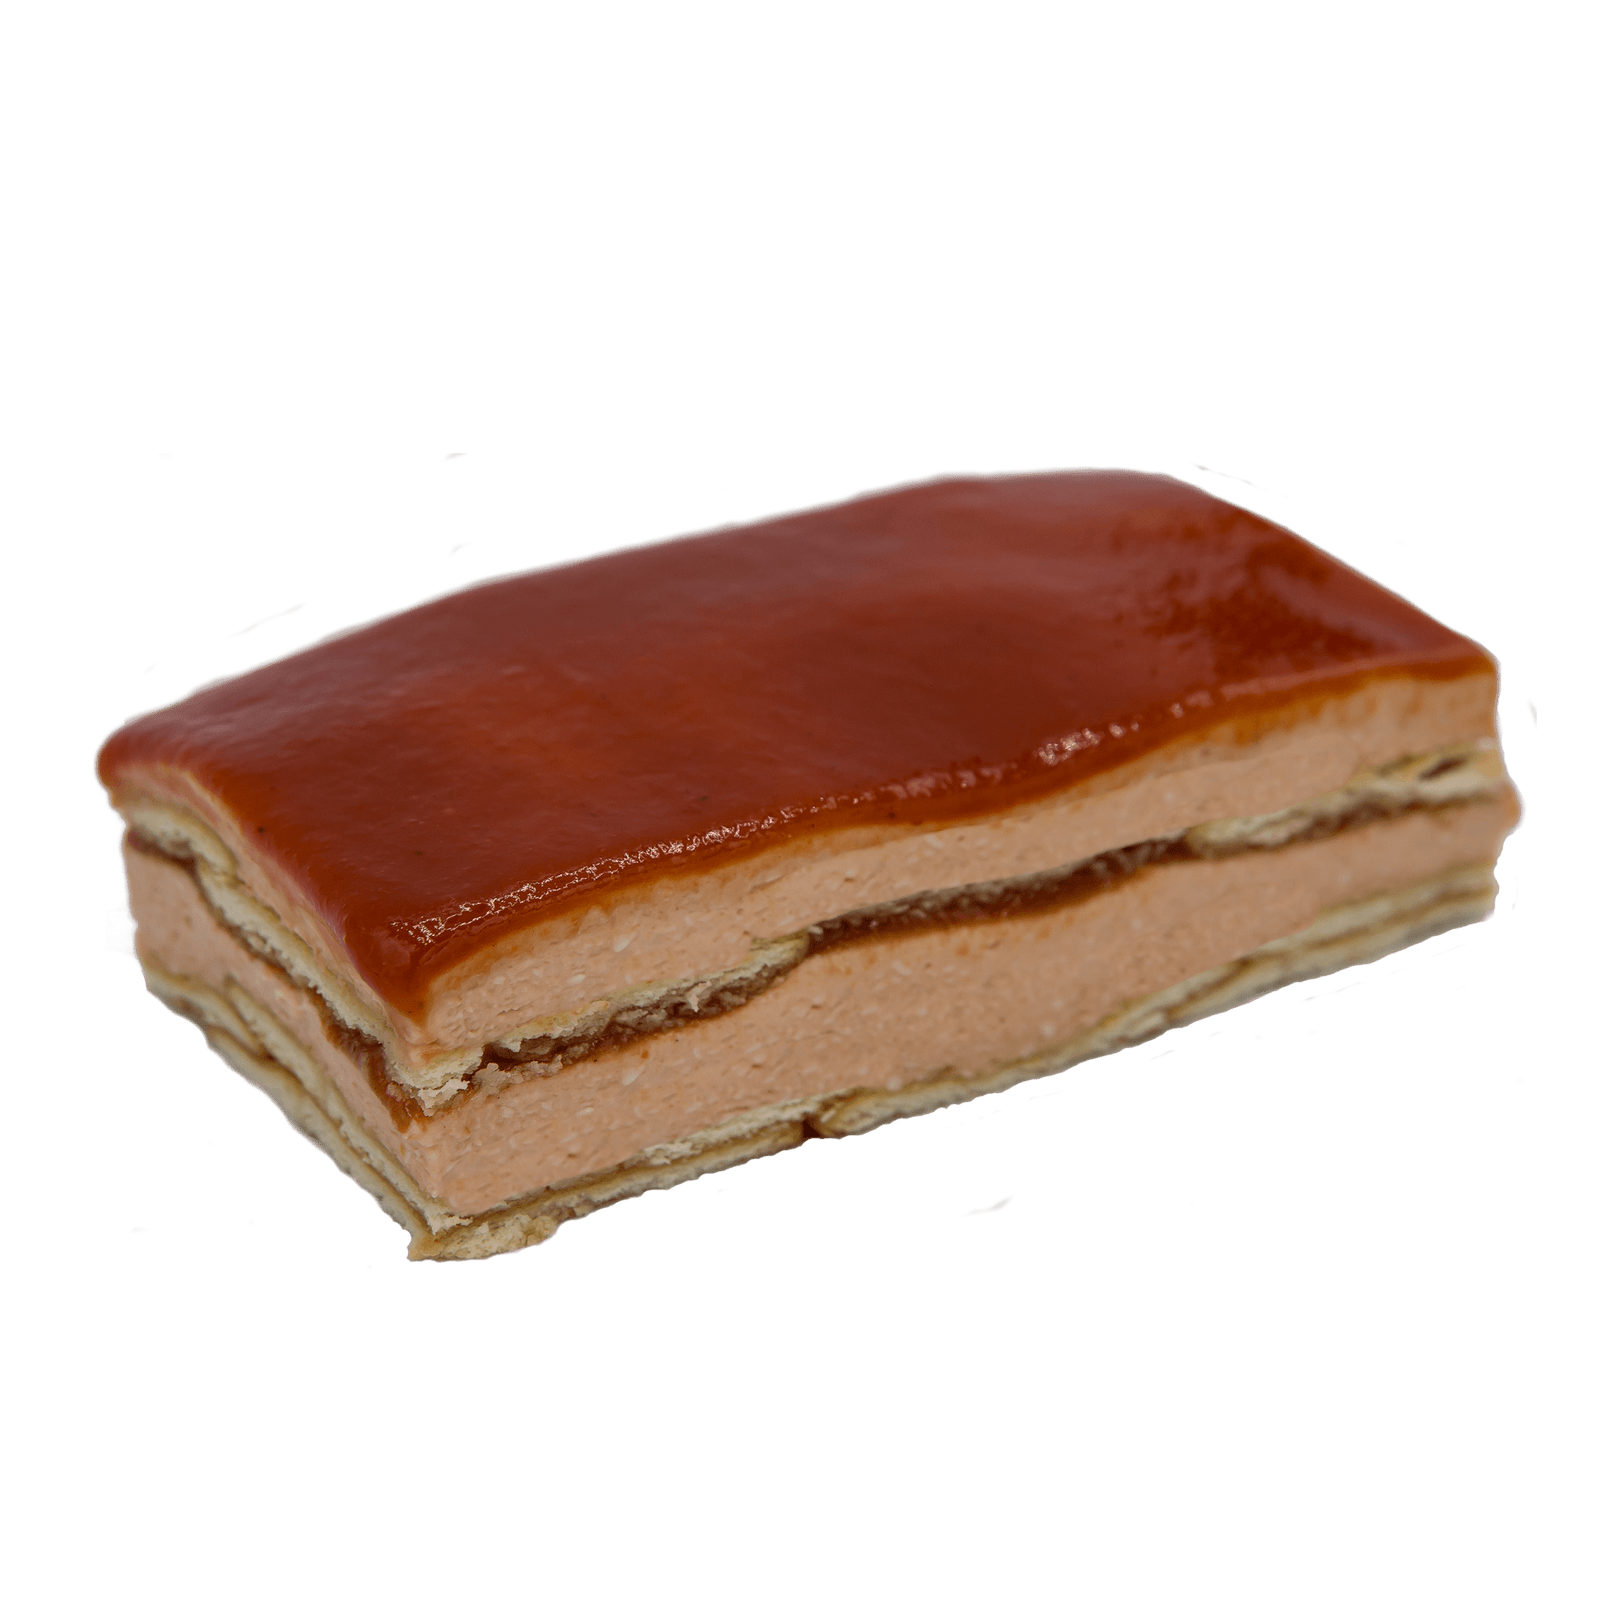 Isolated image of our Guava Dessert